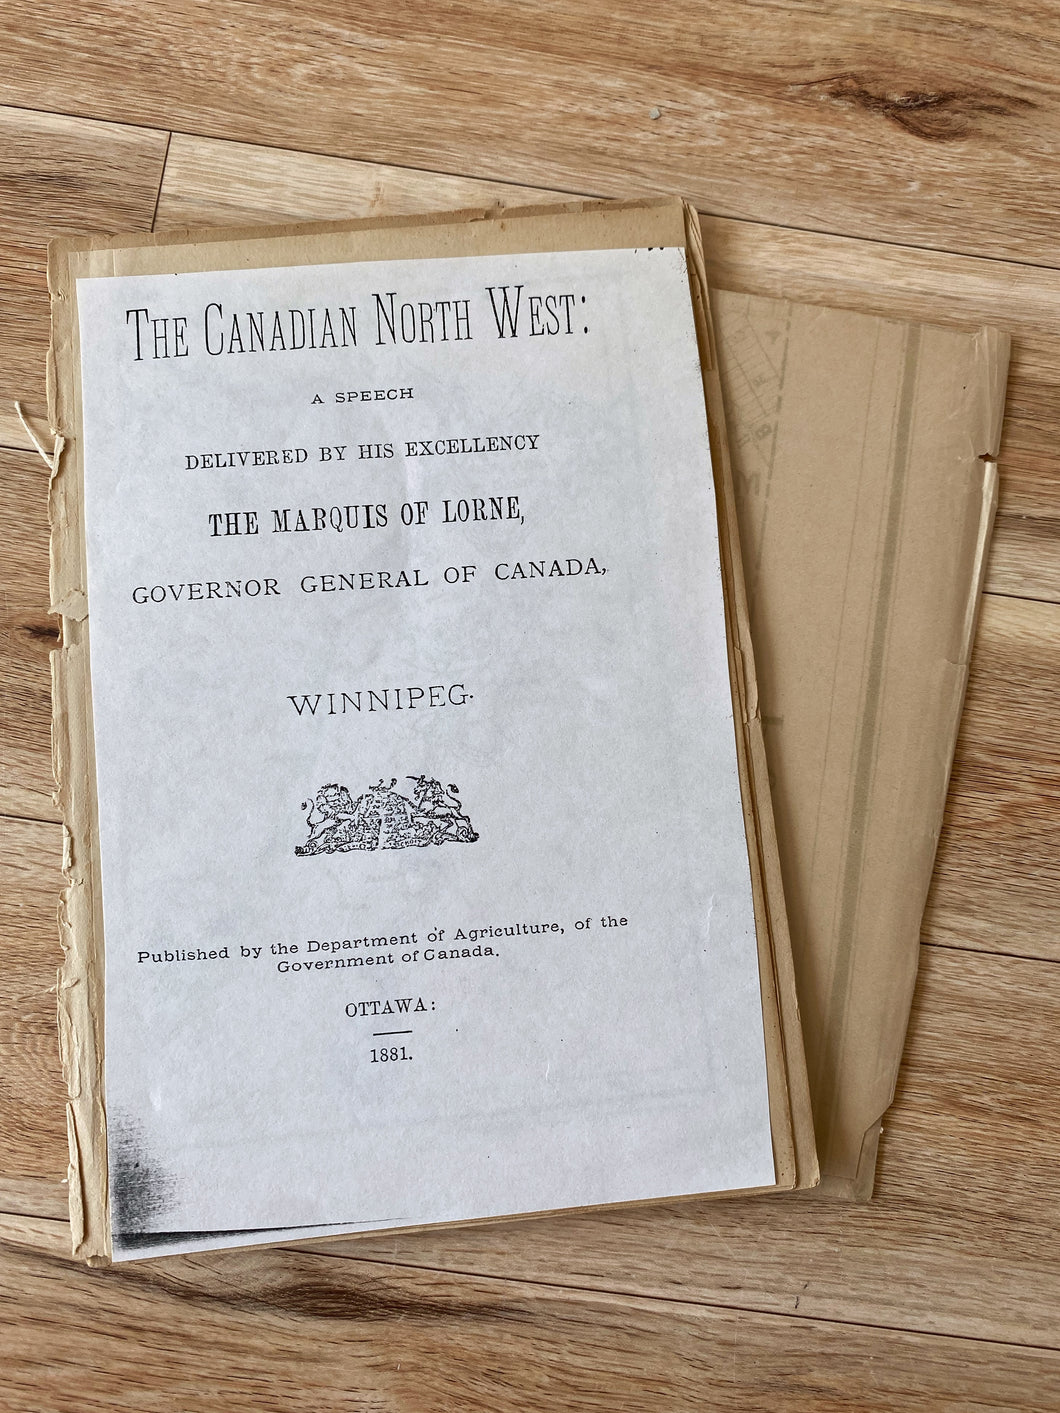 The Canadian Northwest: A Speech Delivered By His Excellency the Marquis of Lorne, Governor General of Canada, Winnipeg